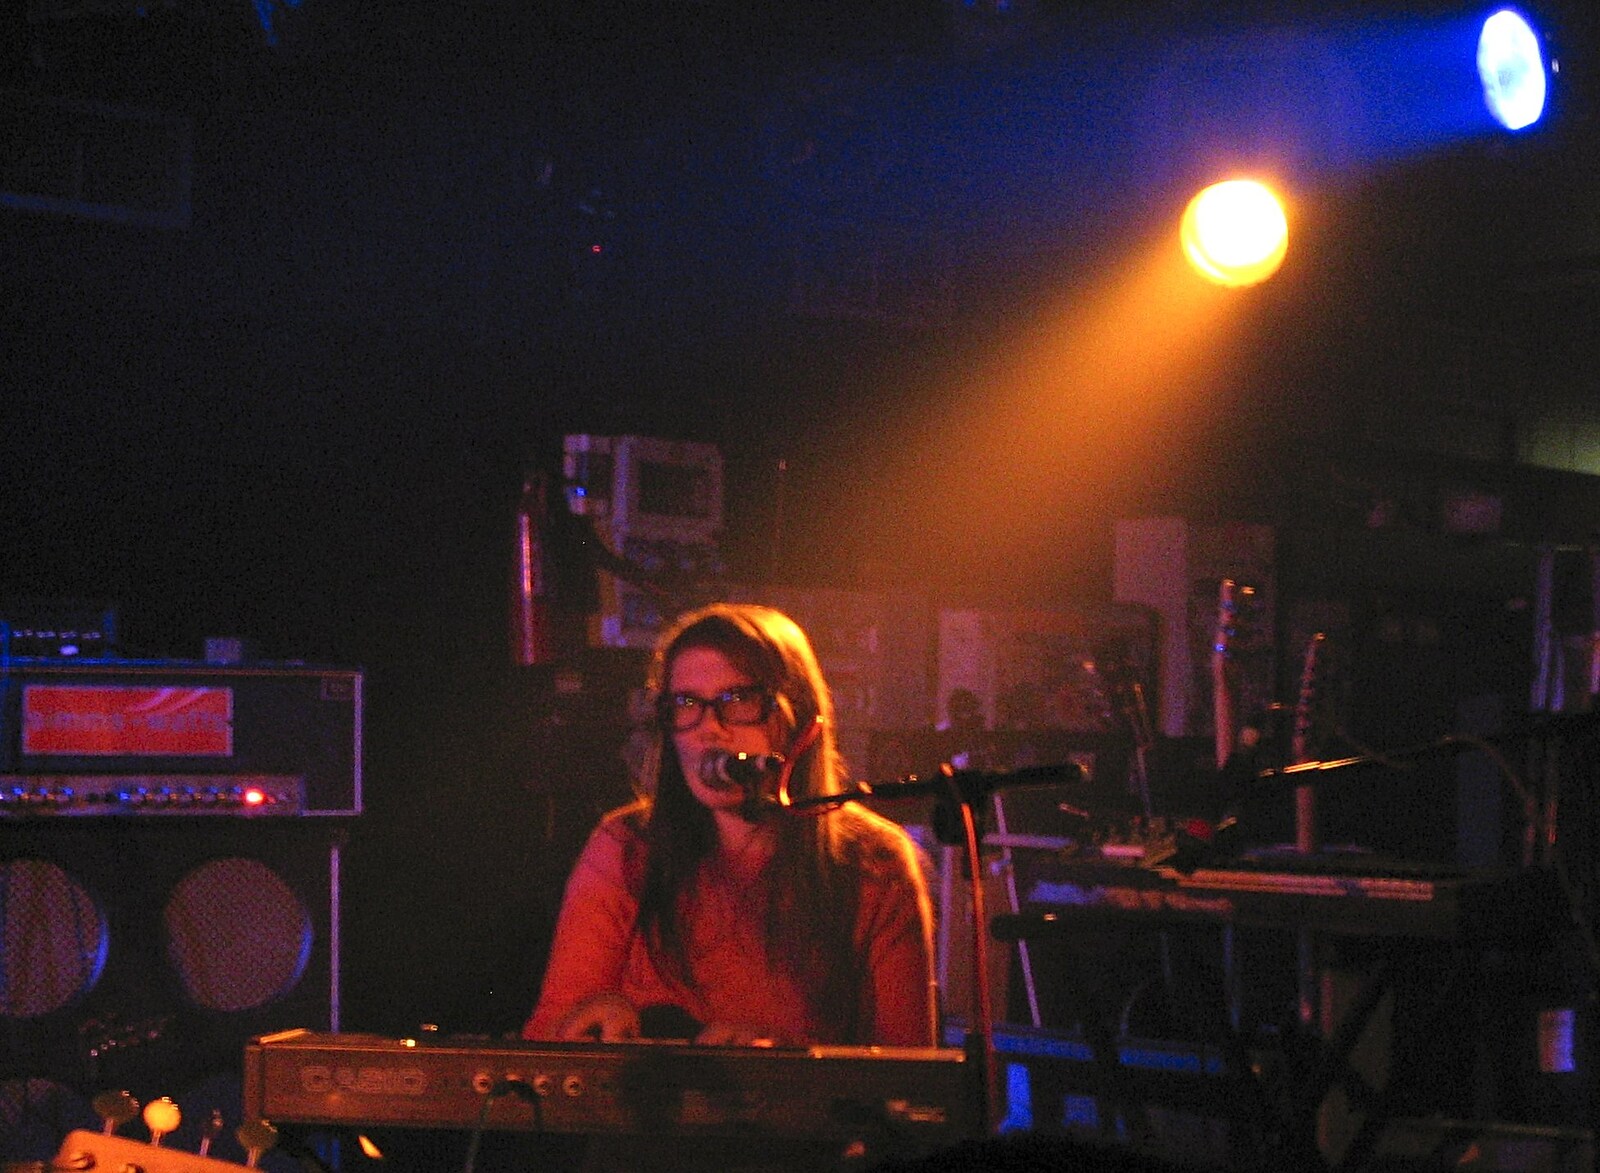 Other-wordly keyboard style from Embrace and Ed Harcourt Live in Norwich, Norfolk - 17th November 2004